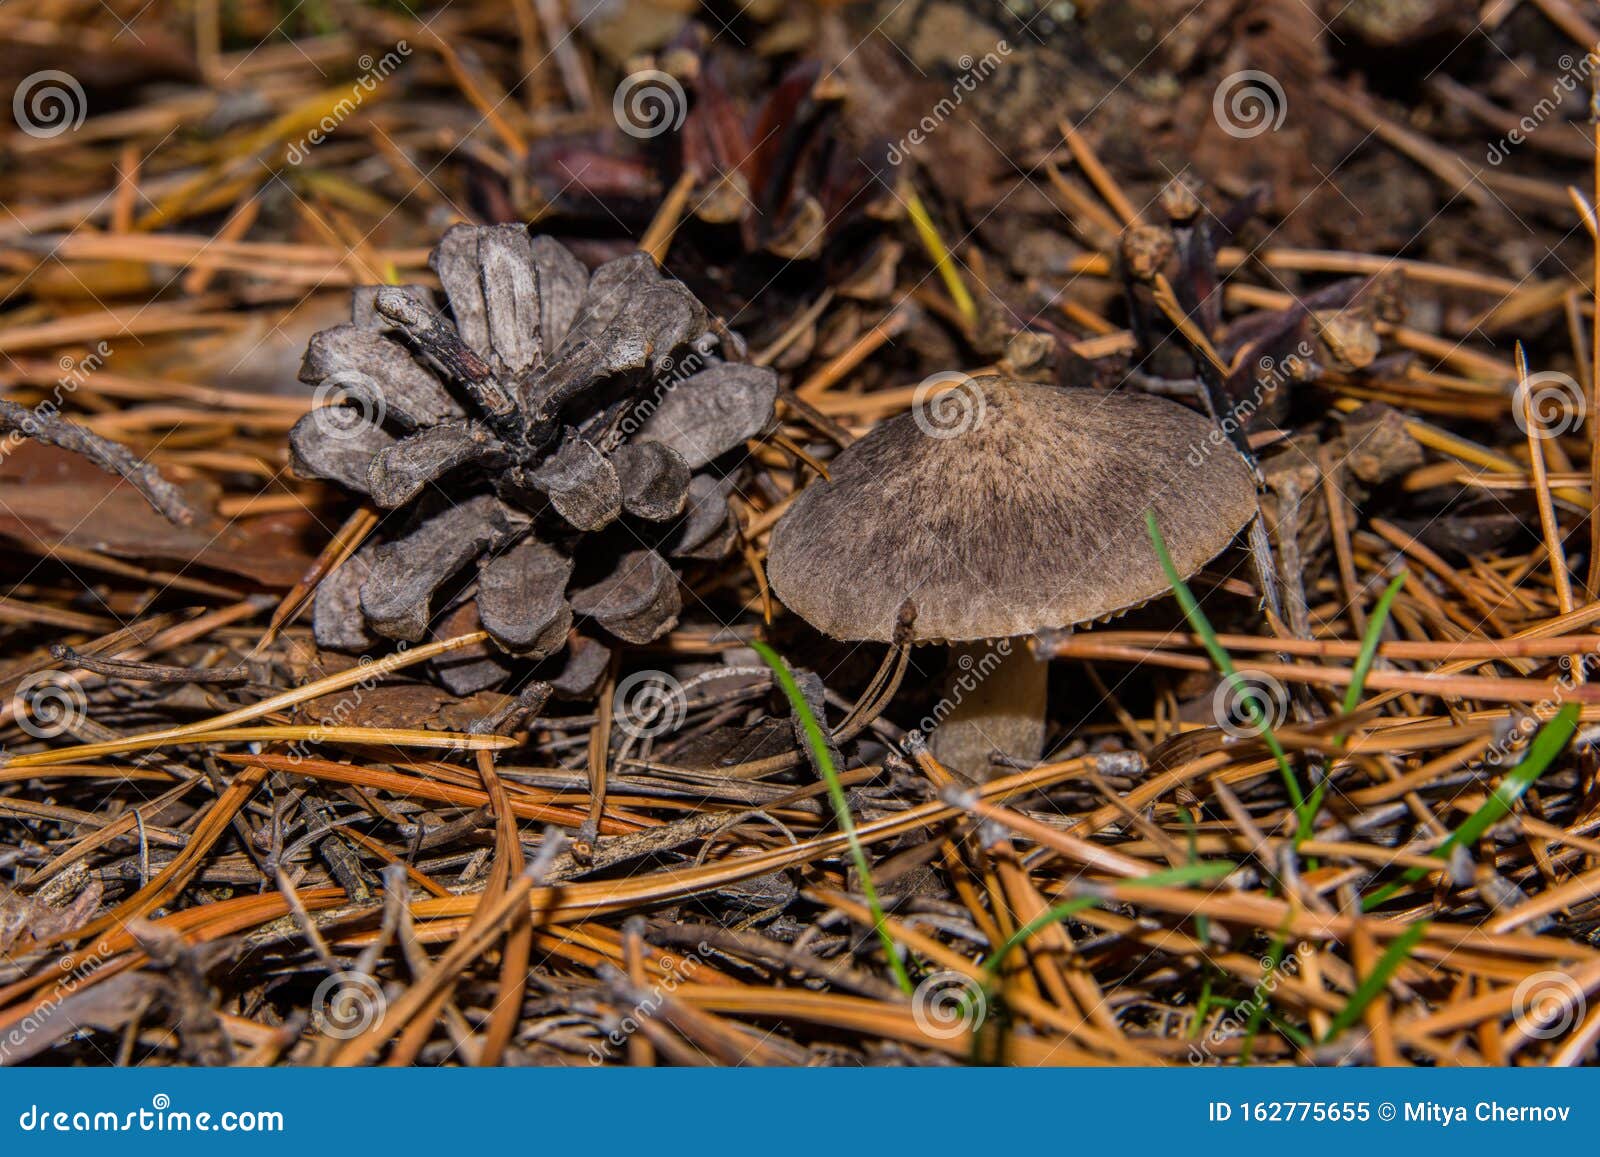 mushroom tricholoma triste and pine cone in pine forest. mushroom close-up. soft selective focus.